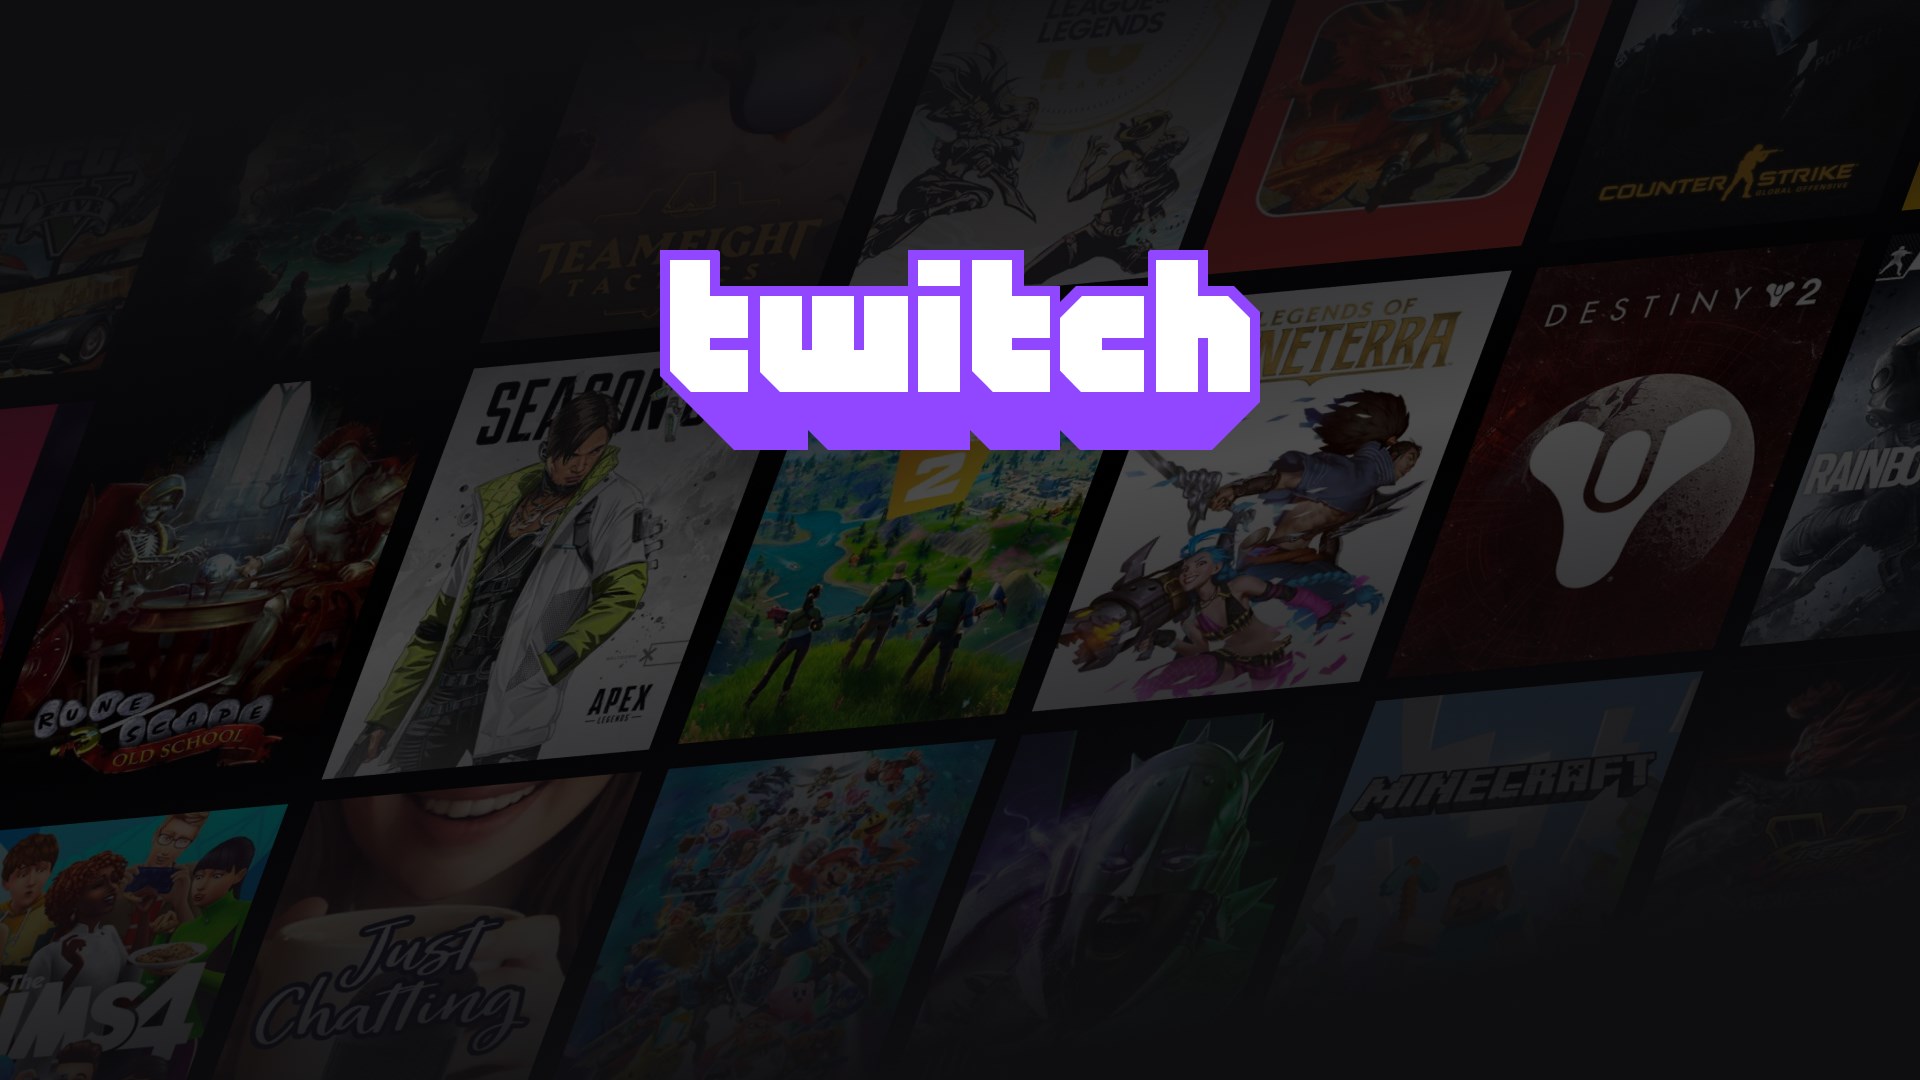 How To Download Twitch on Laptop or PC 